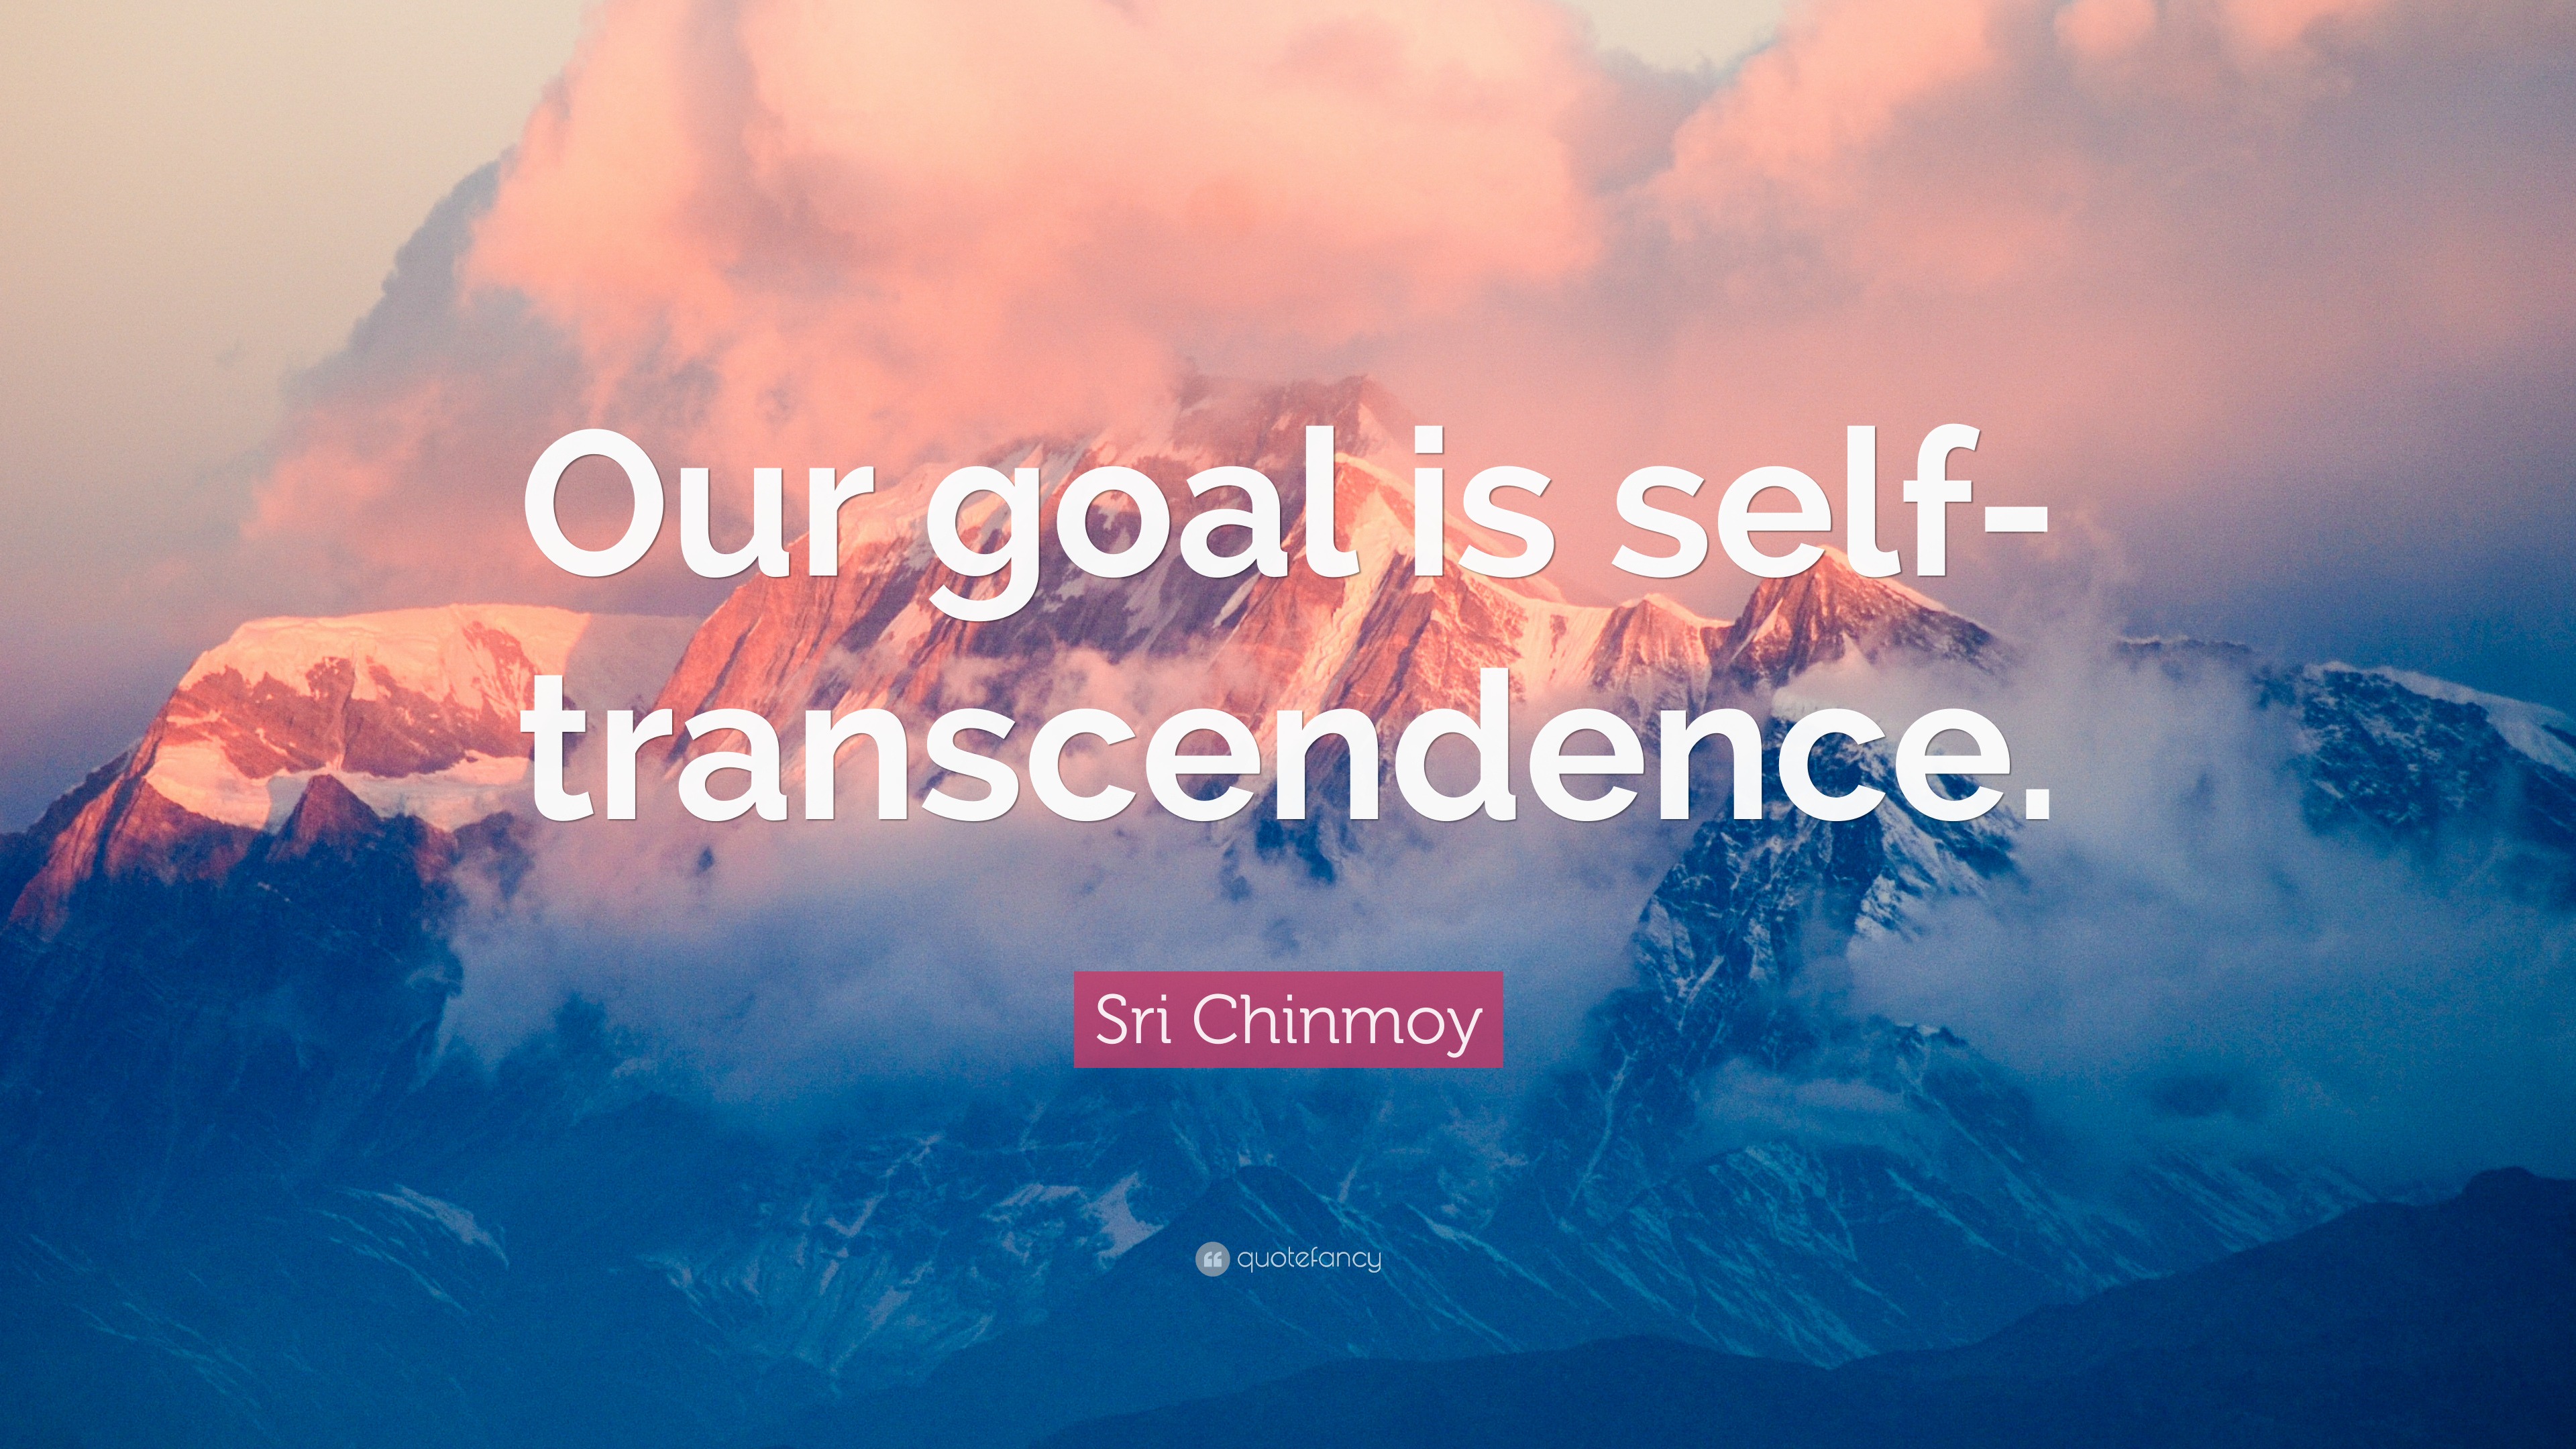 Sri Chinmoy Quote: “Our goal is self